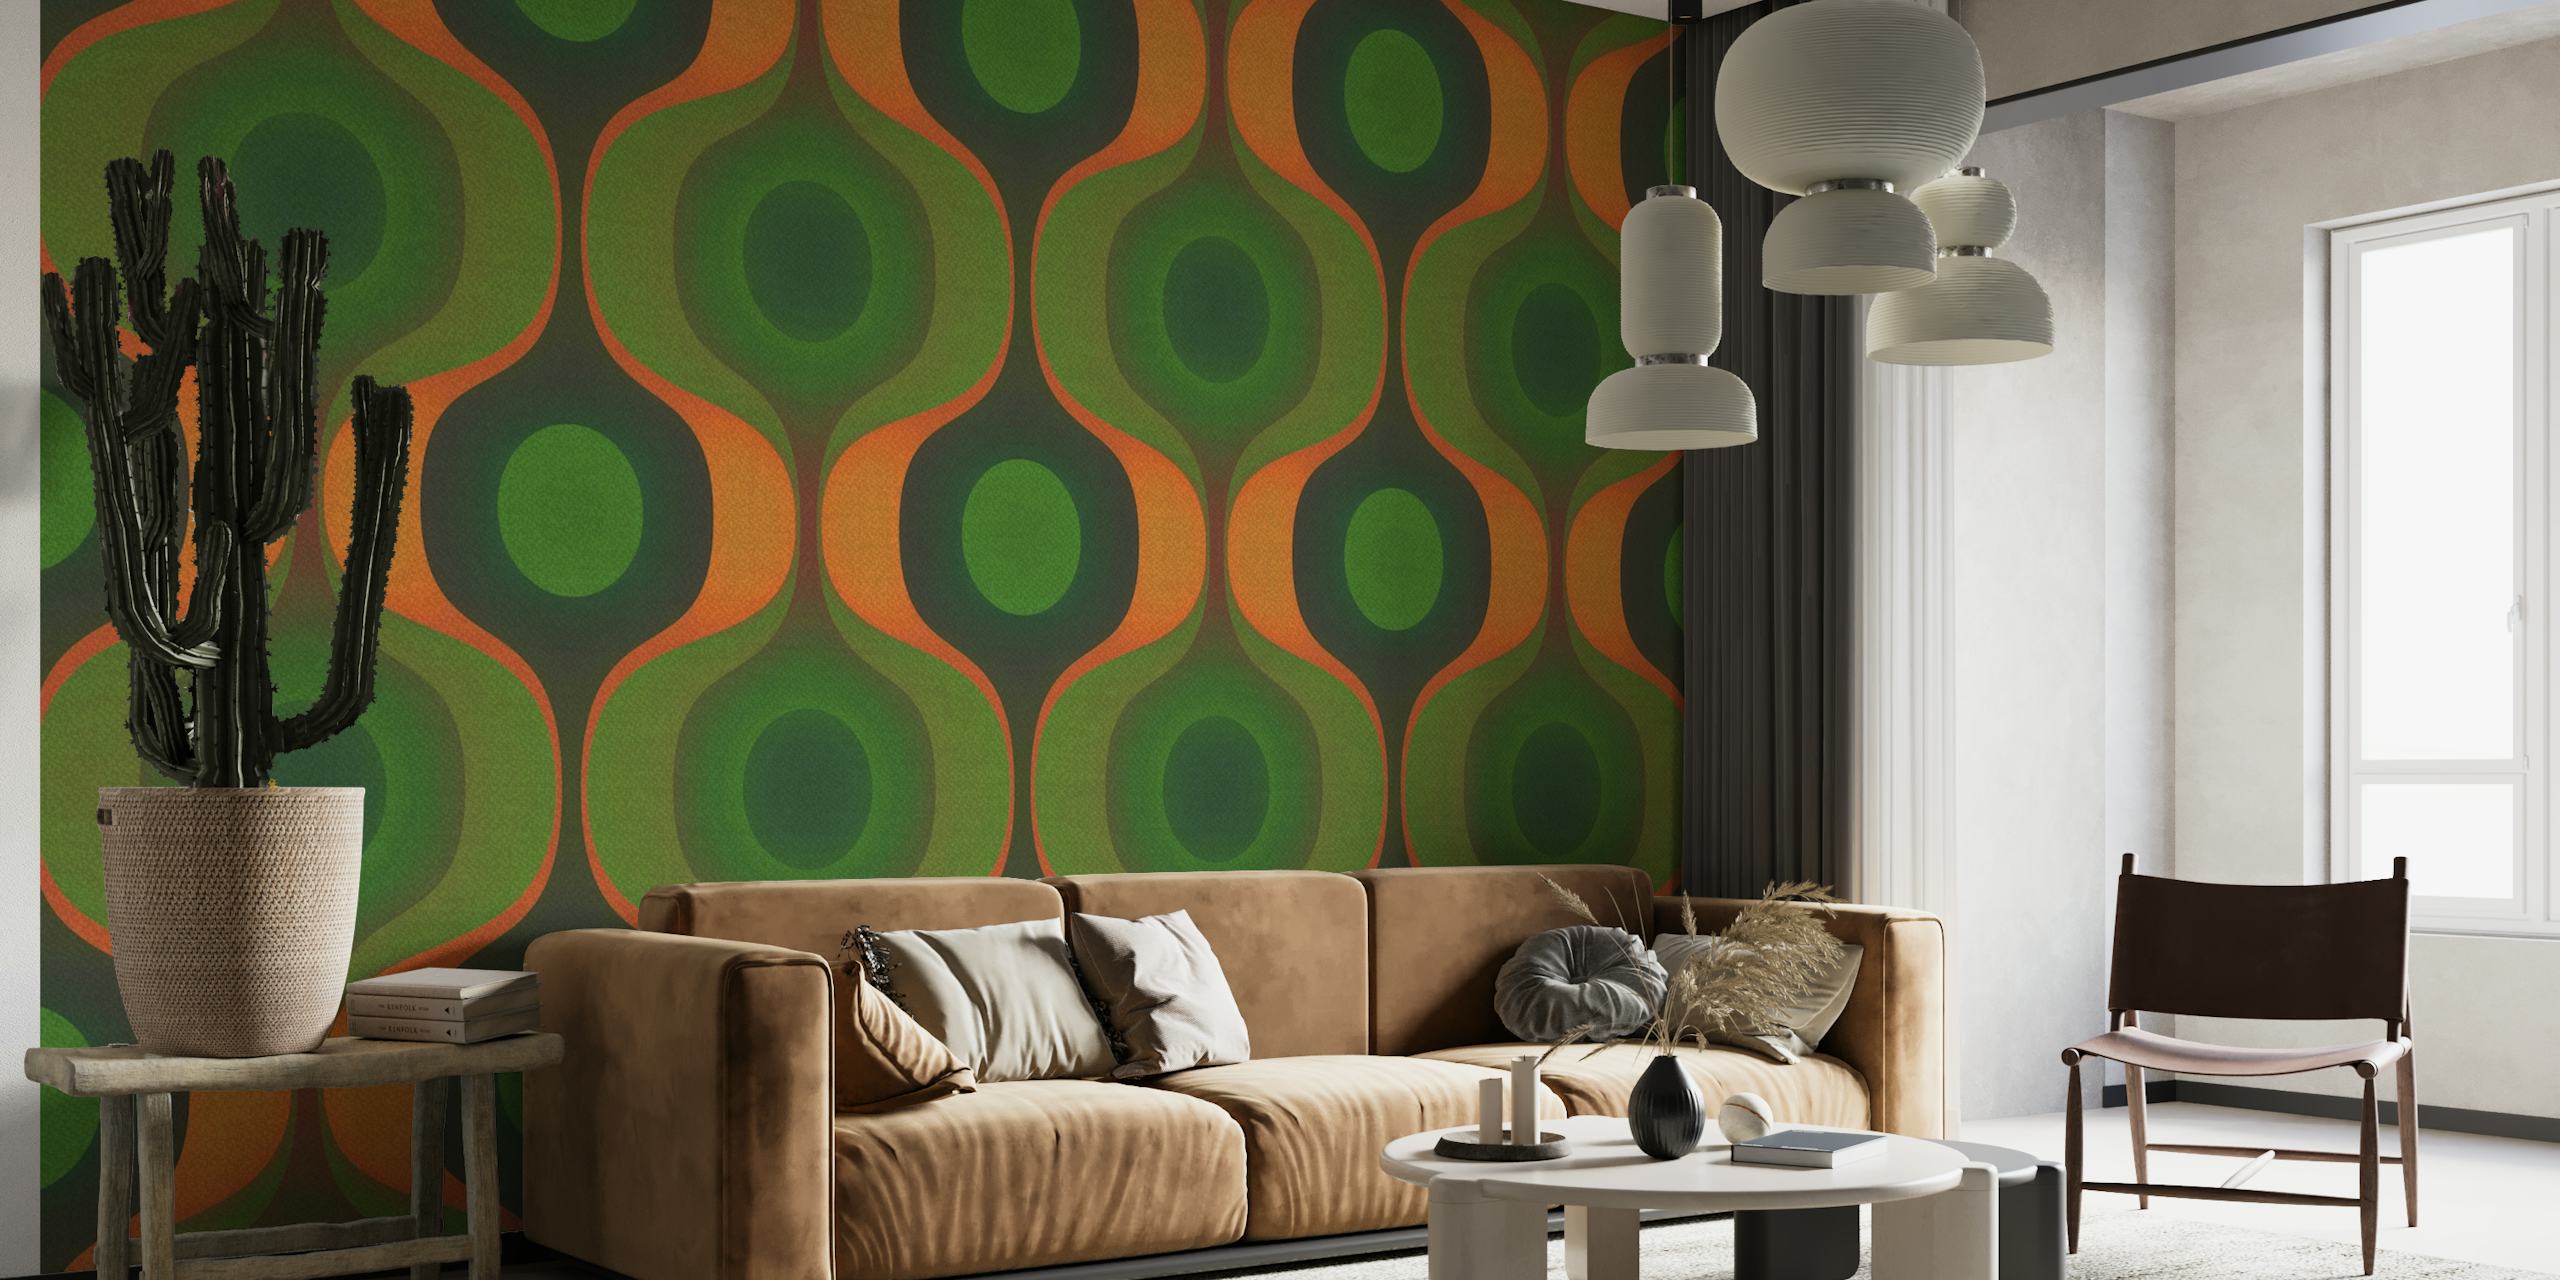 Green and orange geometric pattern wall mural reminiscent of the 1970s.